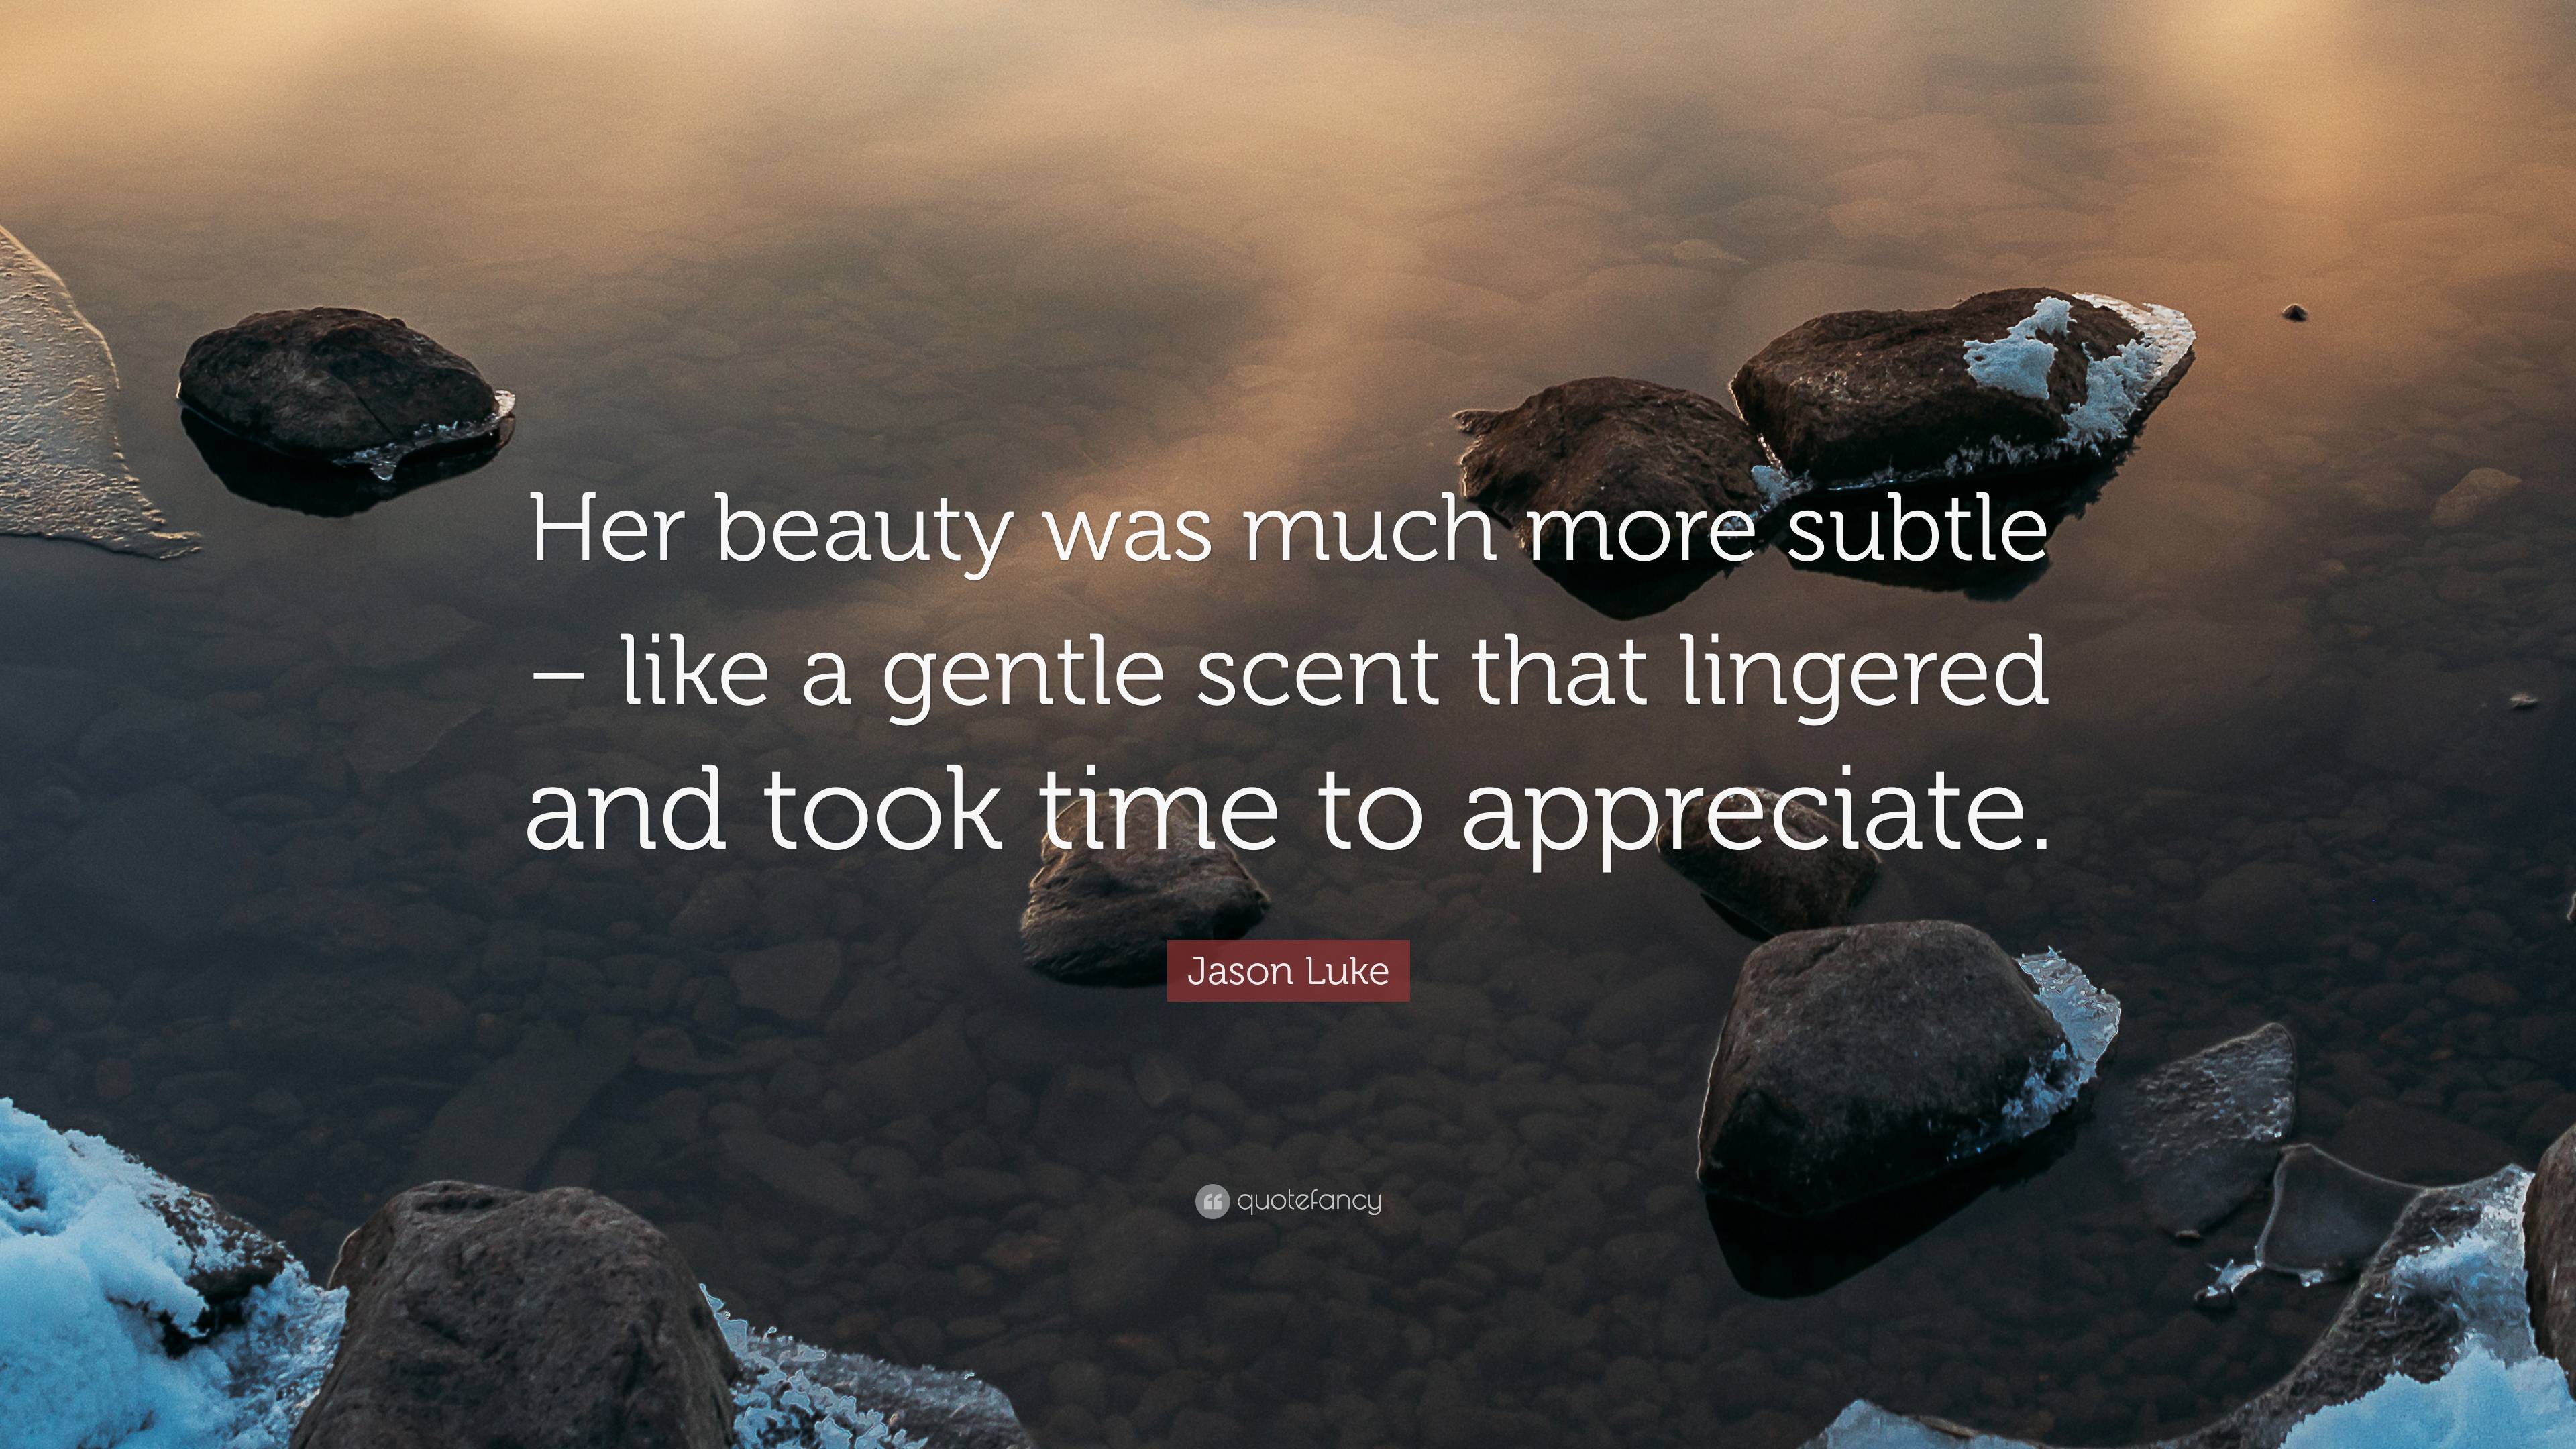 Jason Luke Quote: “Her beauty was much more subtle – like a gentle